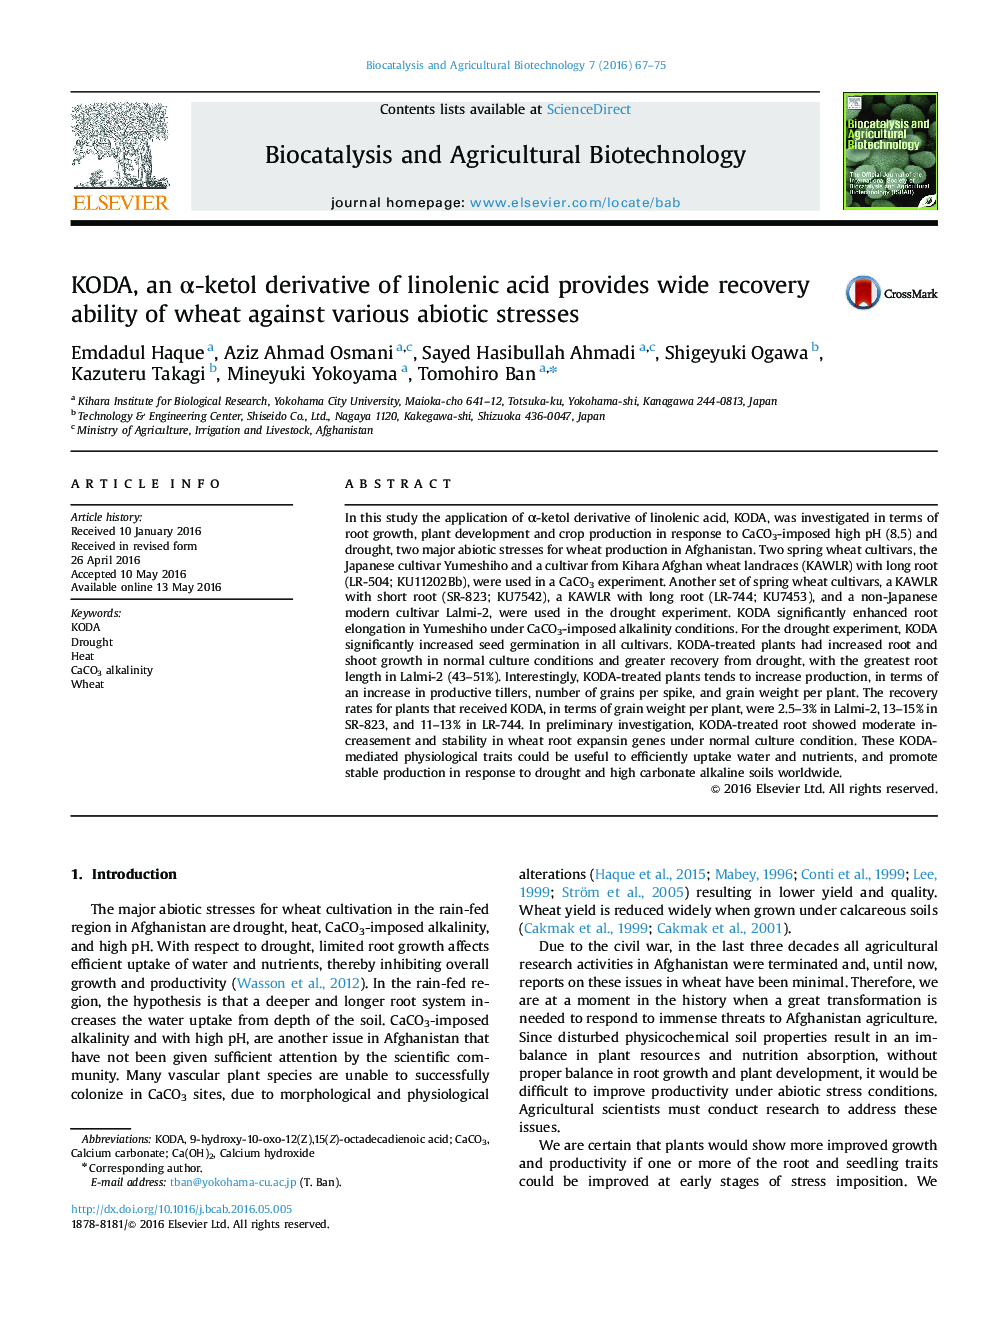 KODA, an α-ketol derivative of linolenic acid provides wide recovery ability of wheat against various abiotic stresses